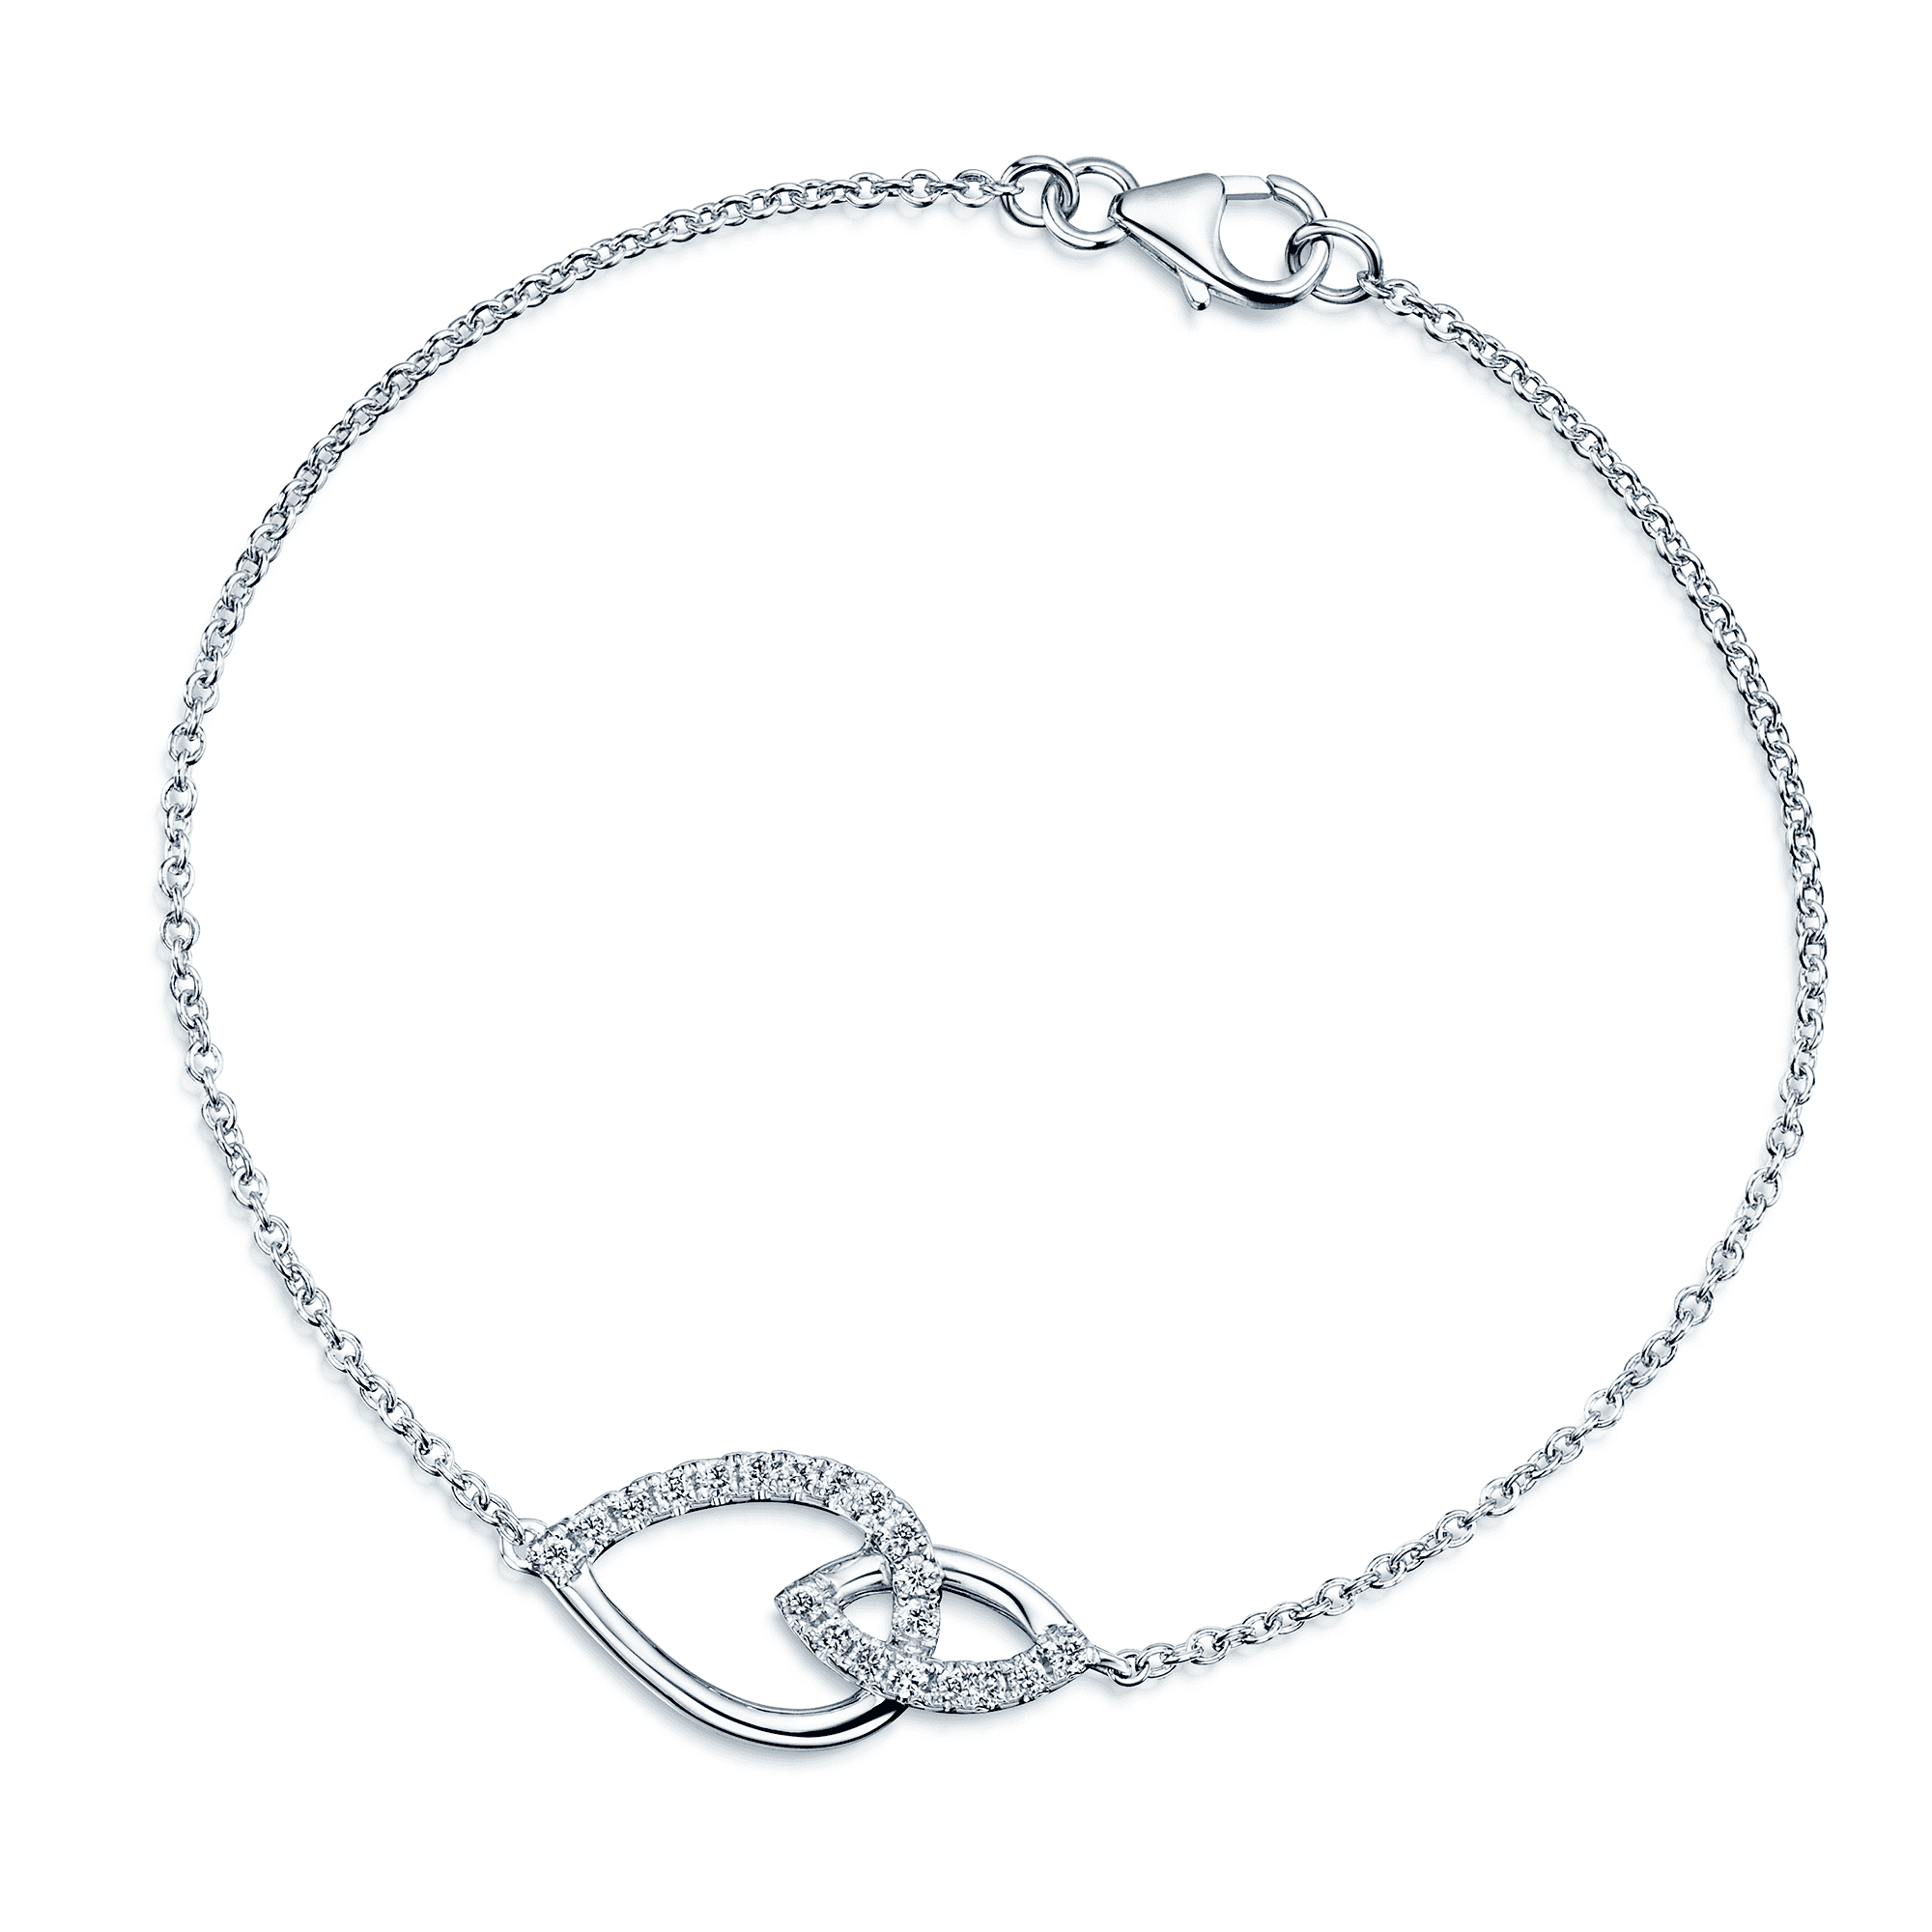 The Origin Collection 18ct White Gold Pave Diamond Open Seed Link Bracelet